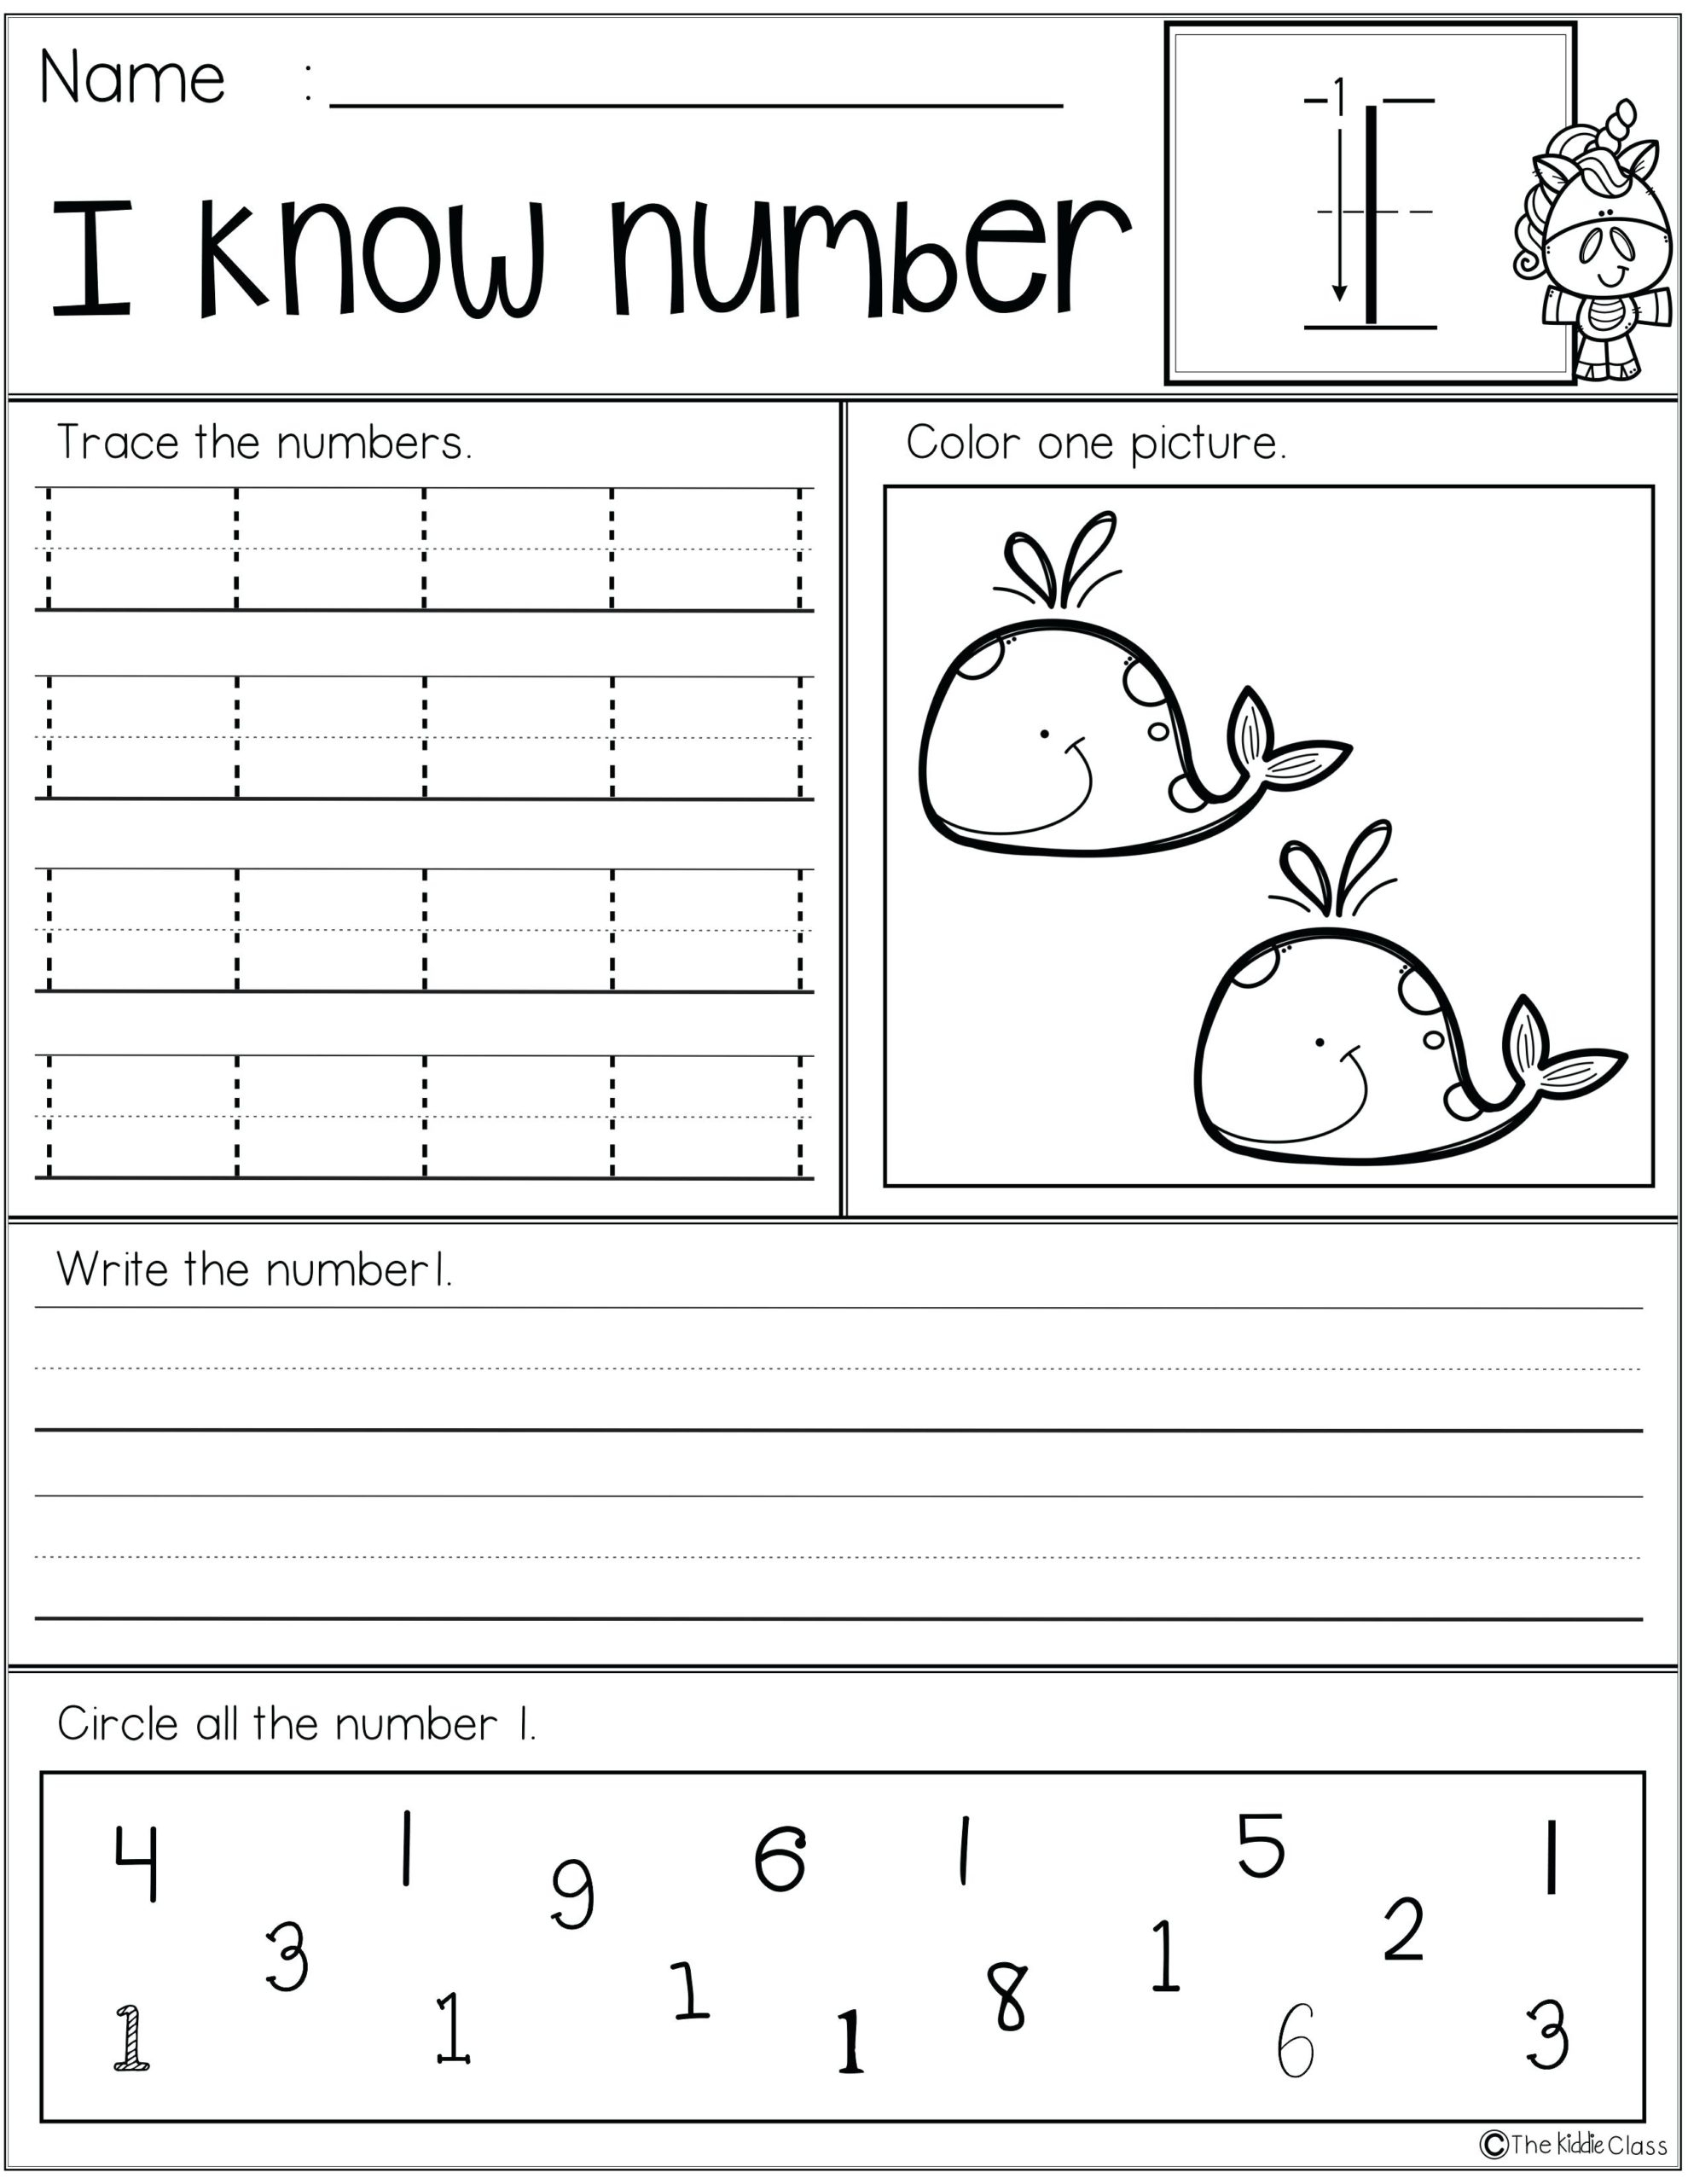 Worksheet : Cool Math Games Addition Reading Activities For with Name Tracing Sheets